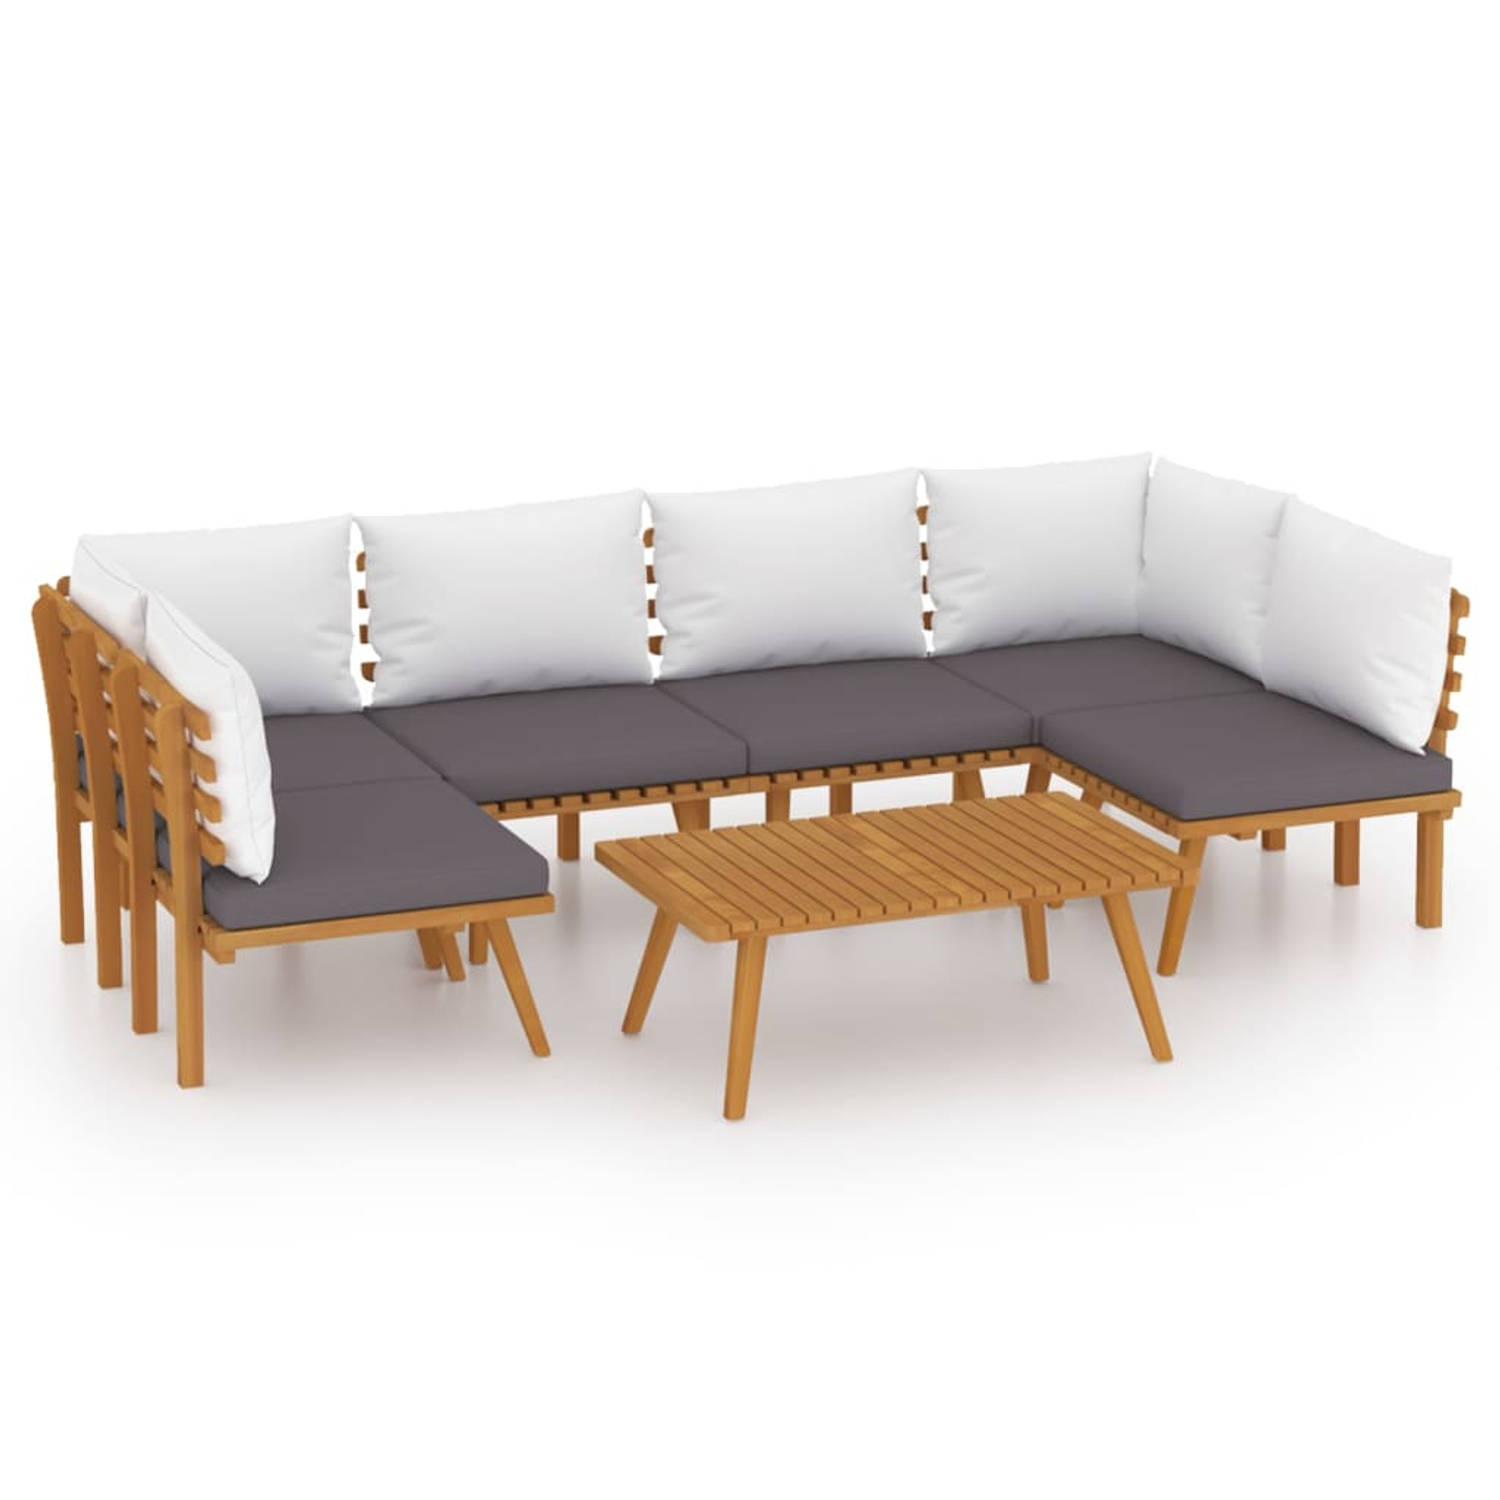 The Living Store Tuinset - Acaciahout - Loungebank - 90x55x35 cm - Donkergrijs en wit